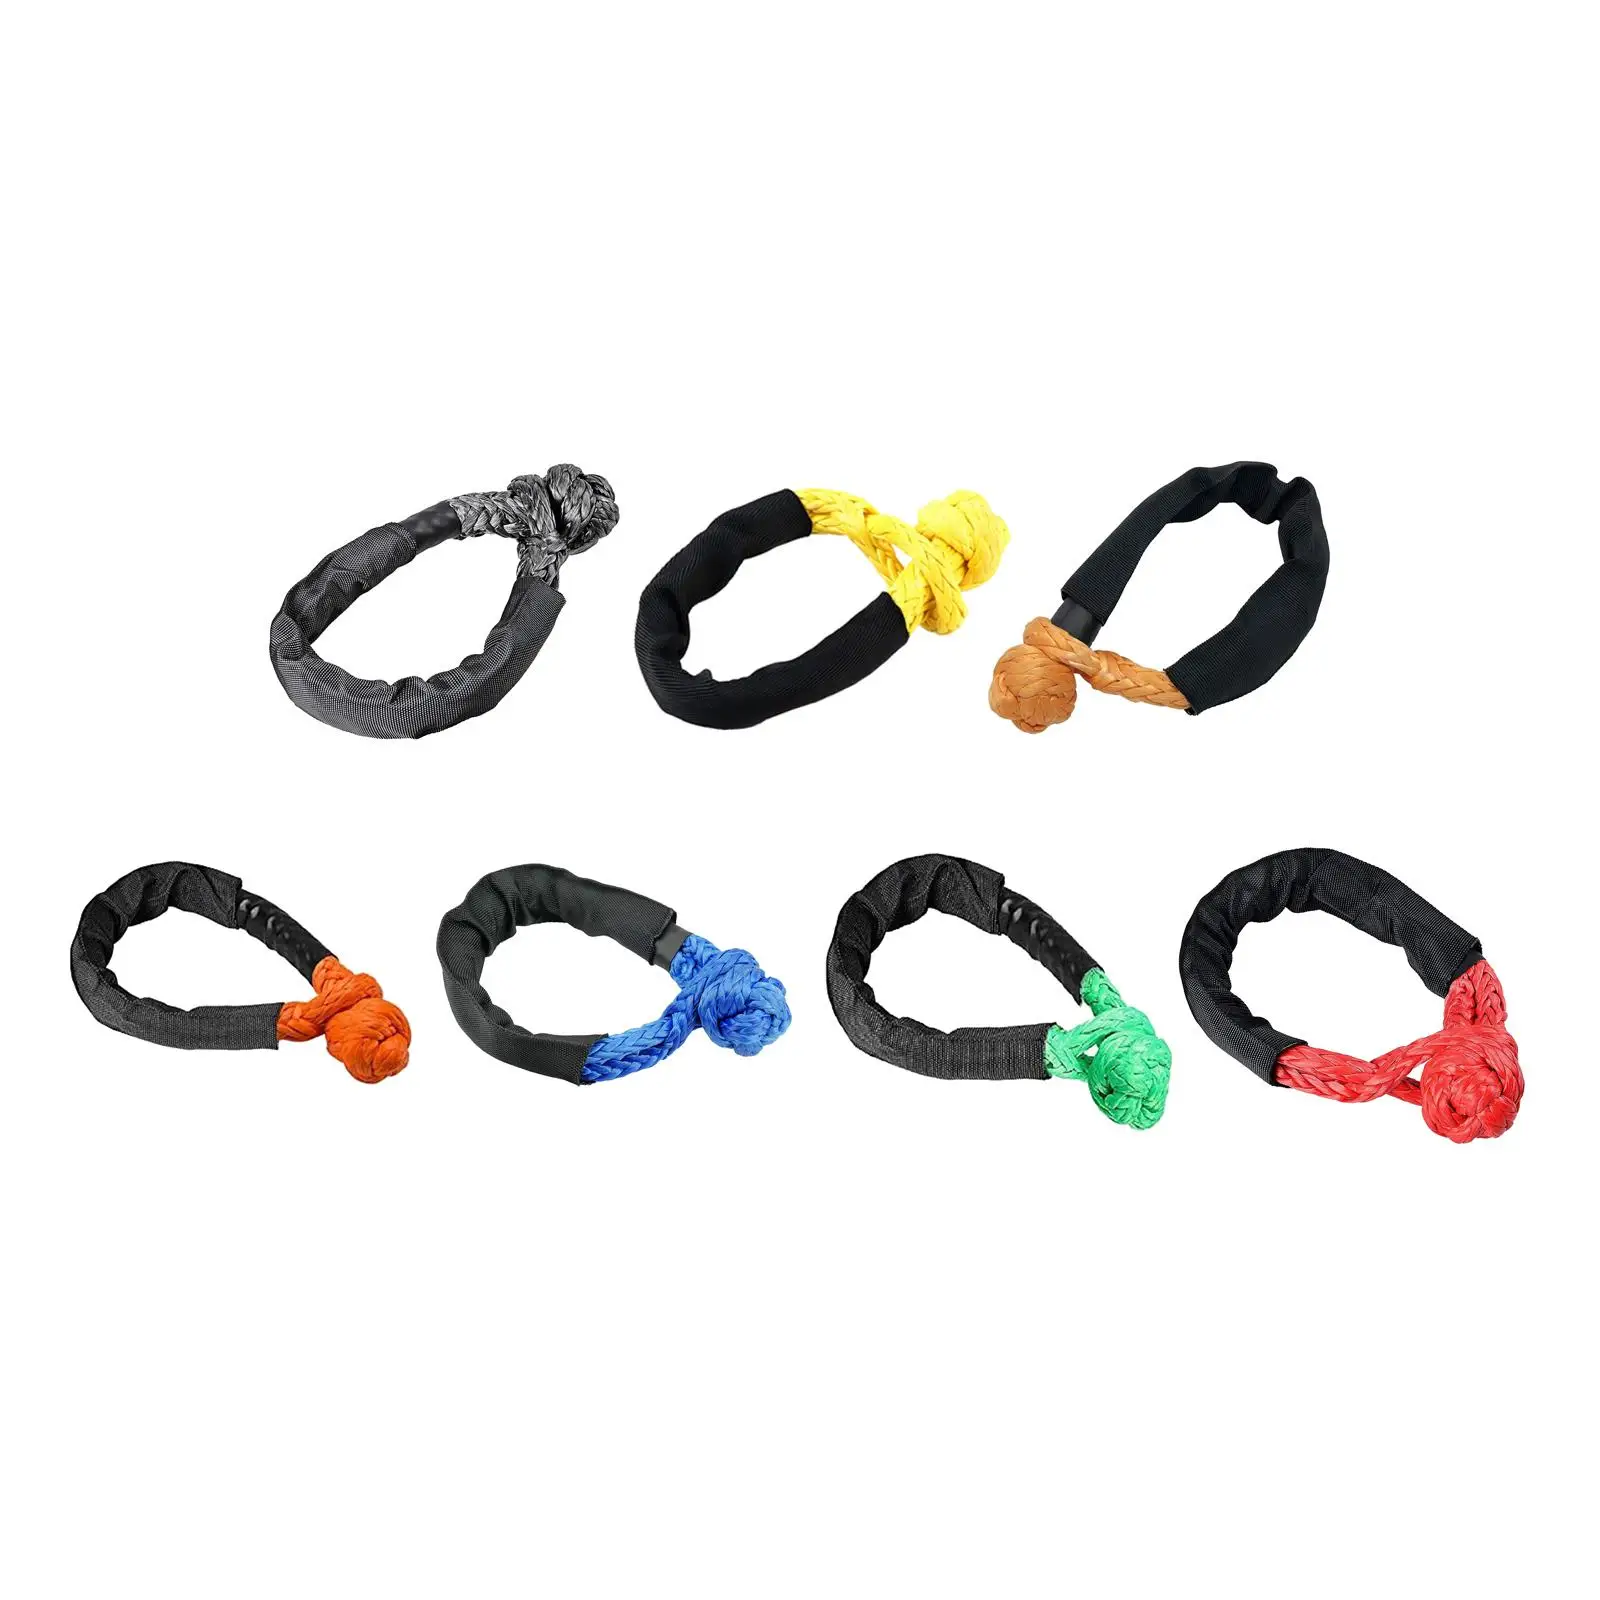 Synthetic Soft Shackle Rugged  Shackles with Protective Sleeve for  Towing Vehicle 